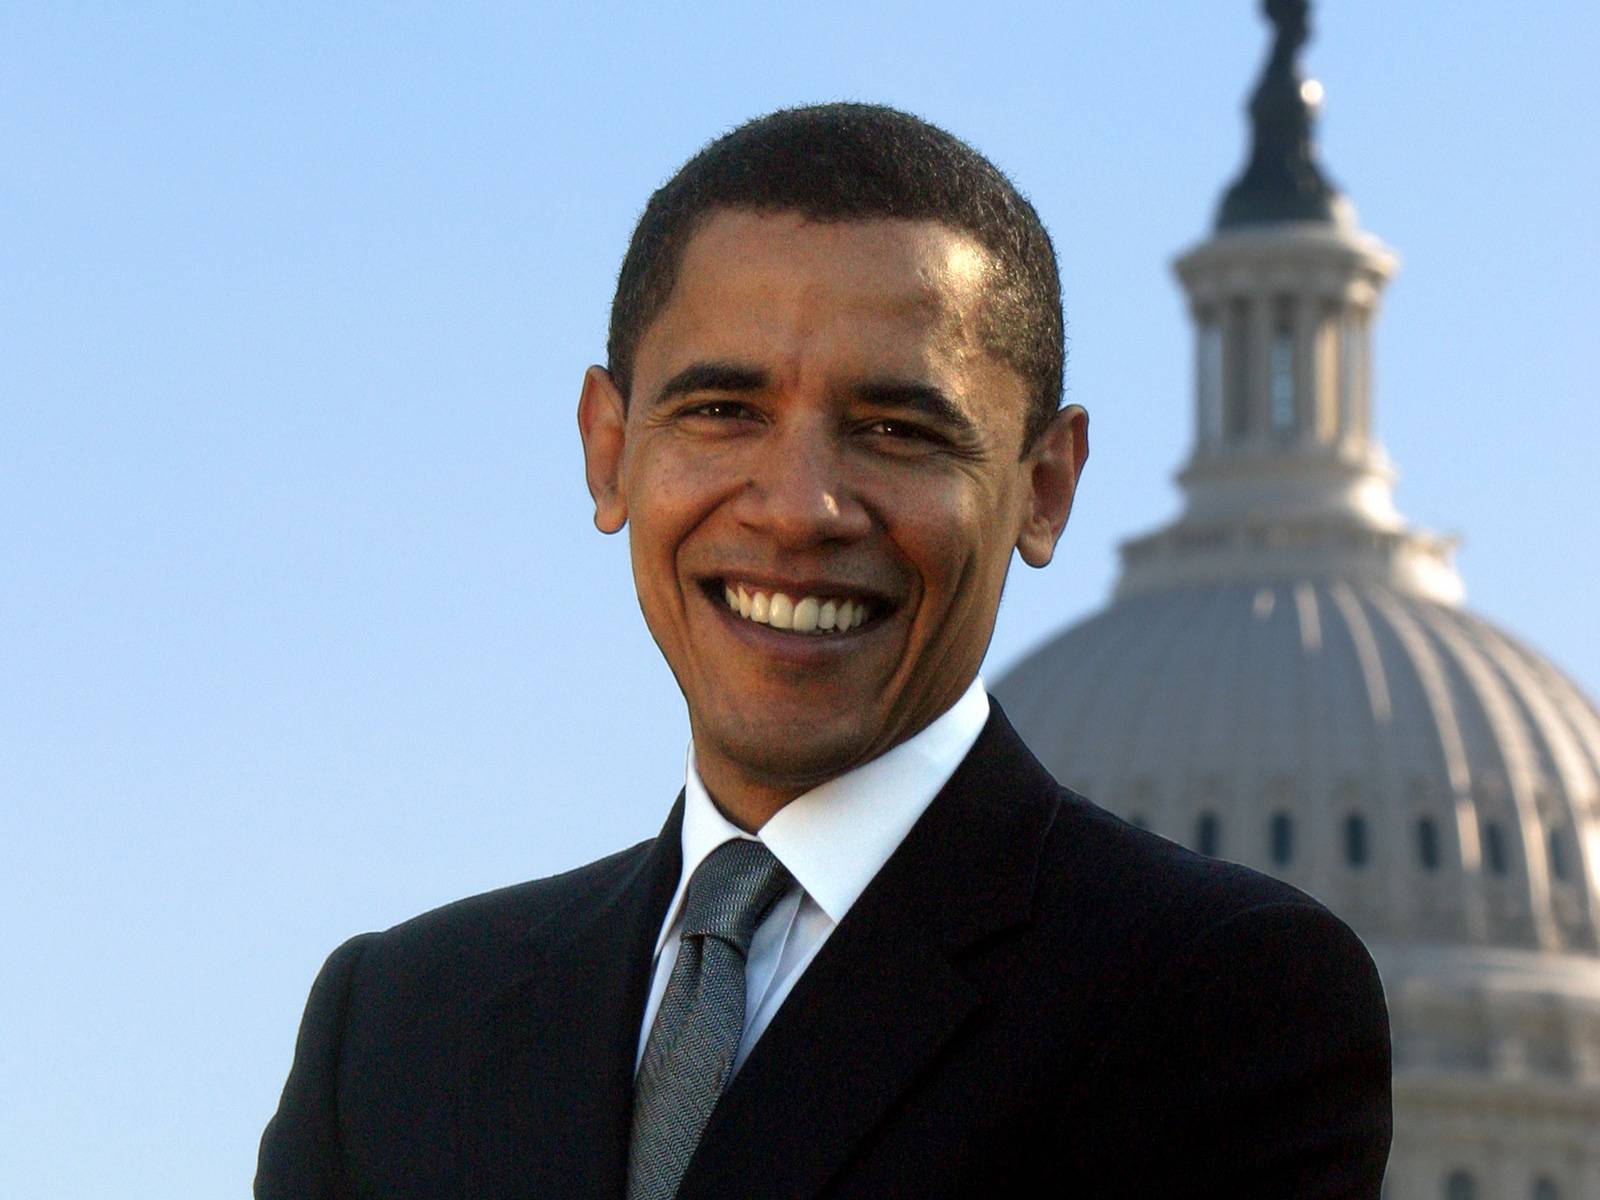 Funny Quotes by Barack Obama